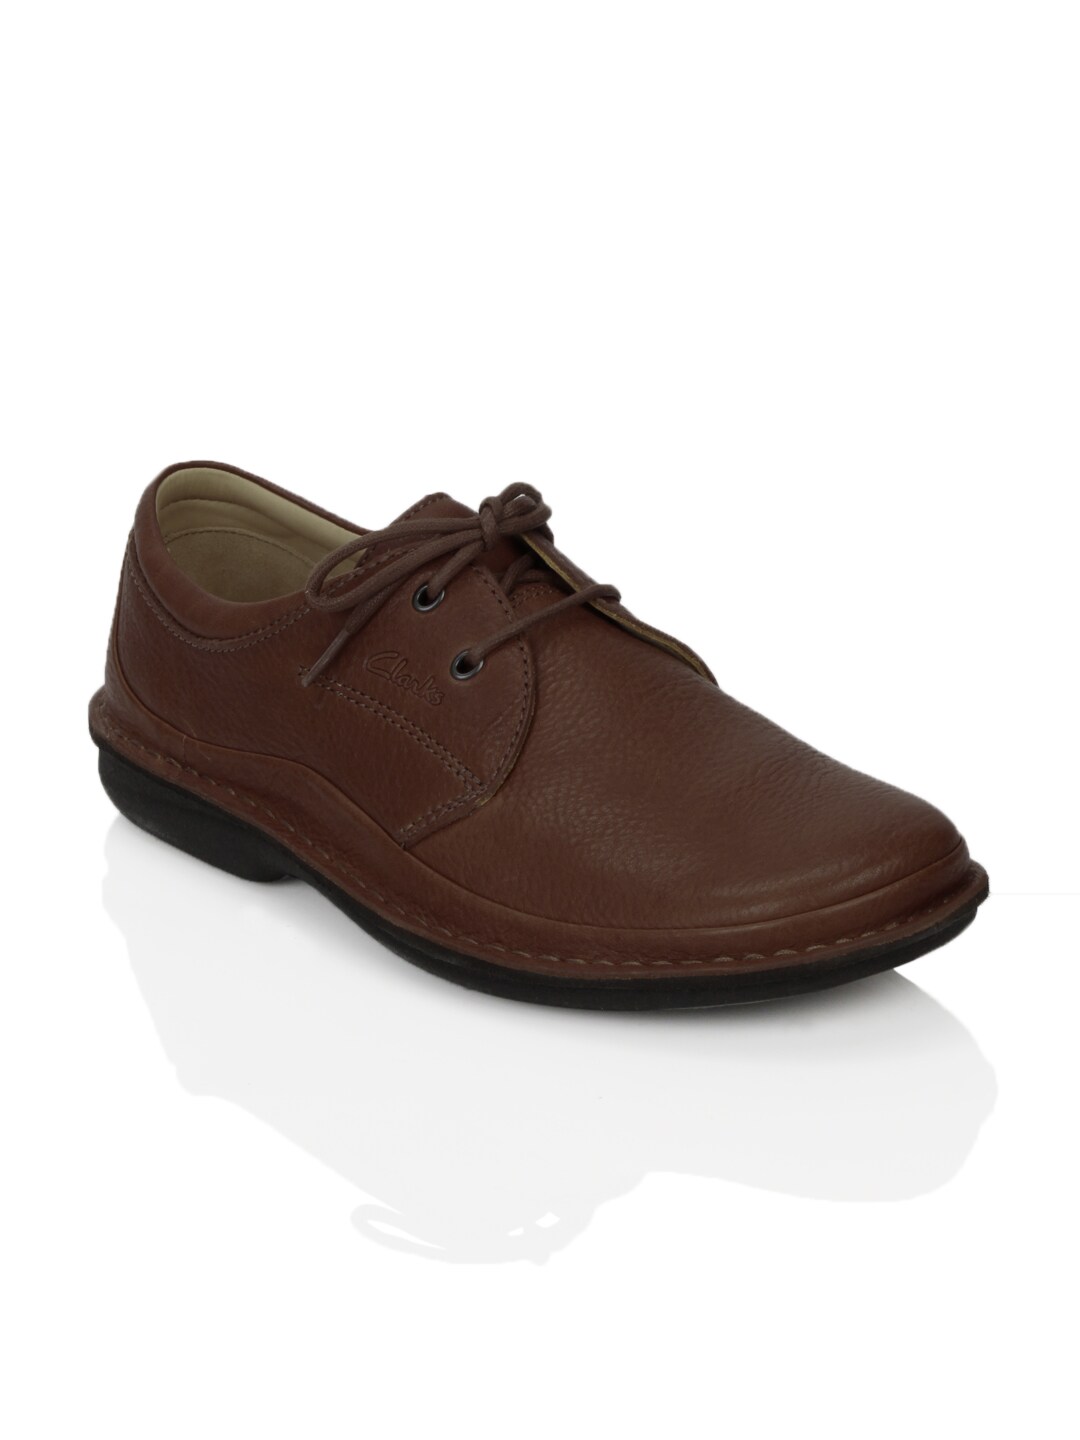 Clarks Men Sentry Cry Mahogany Leather Brown Shoes